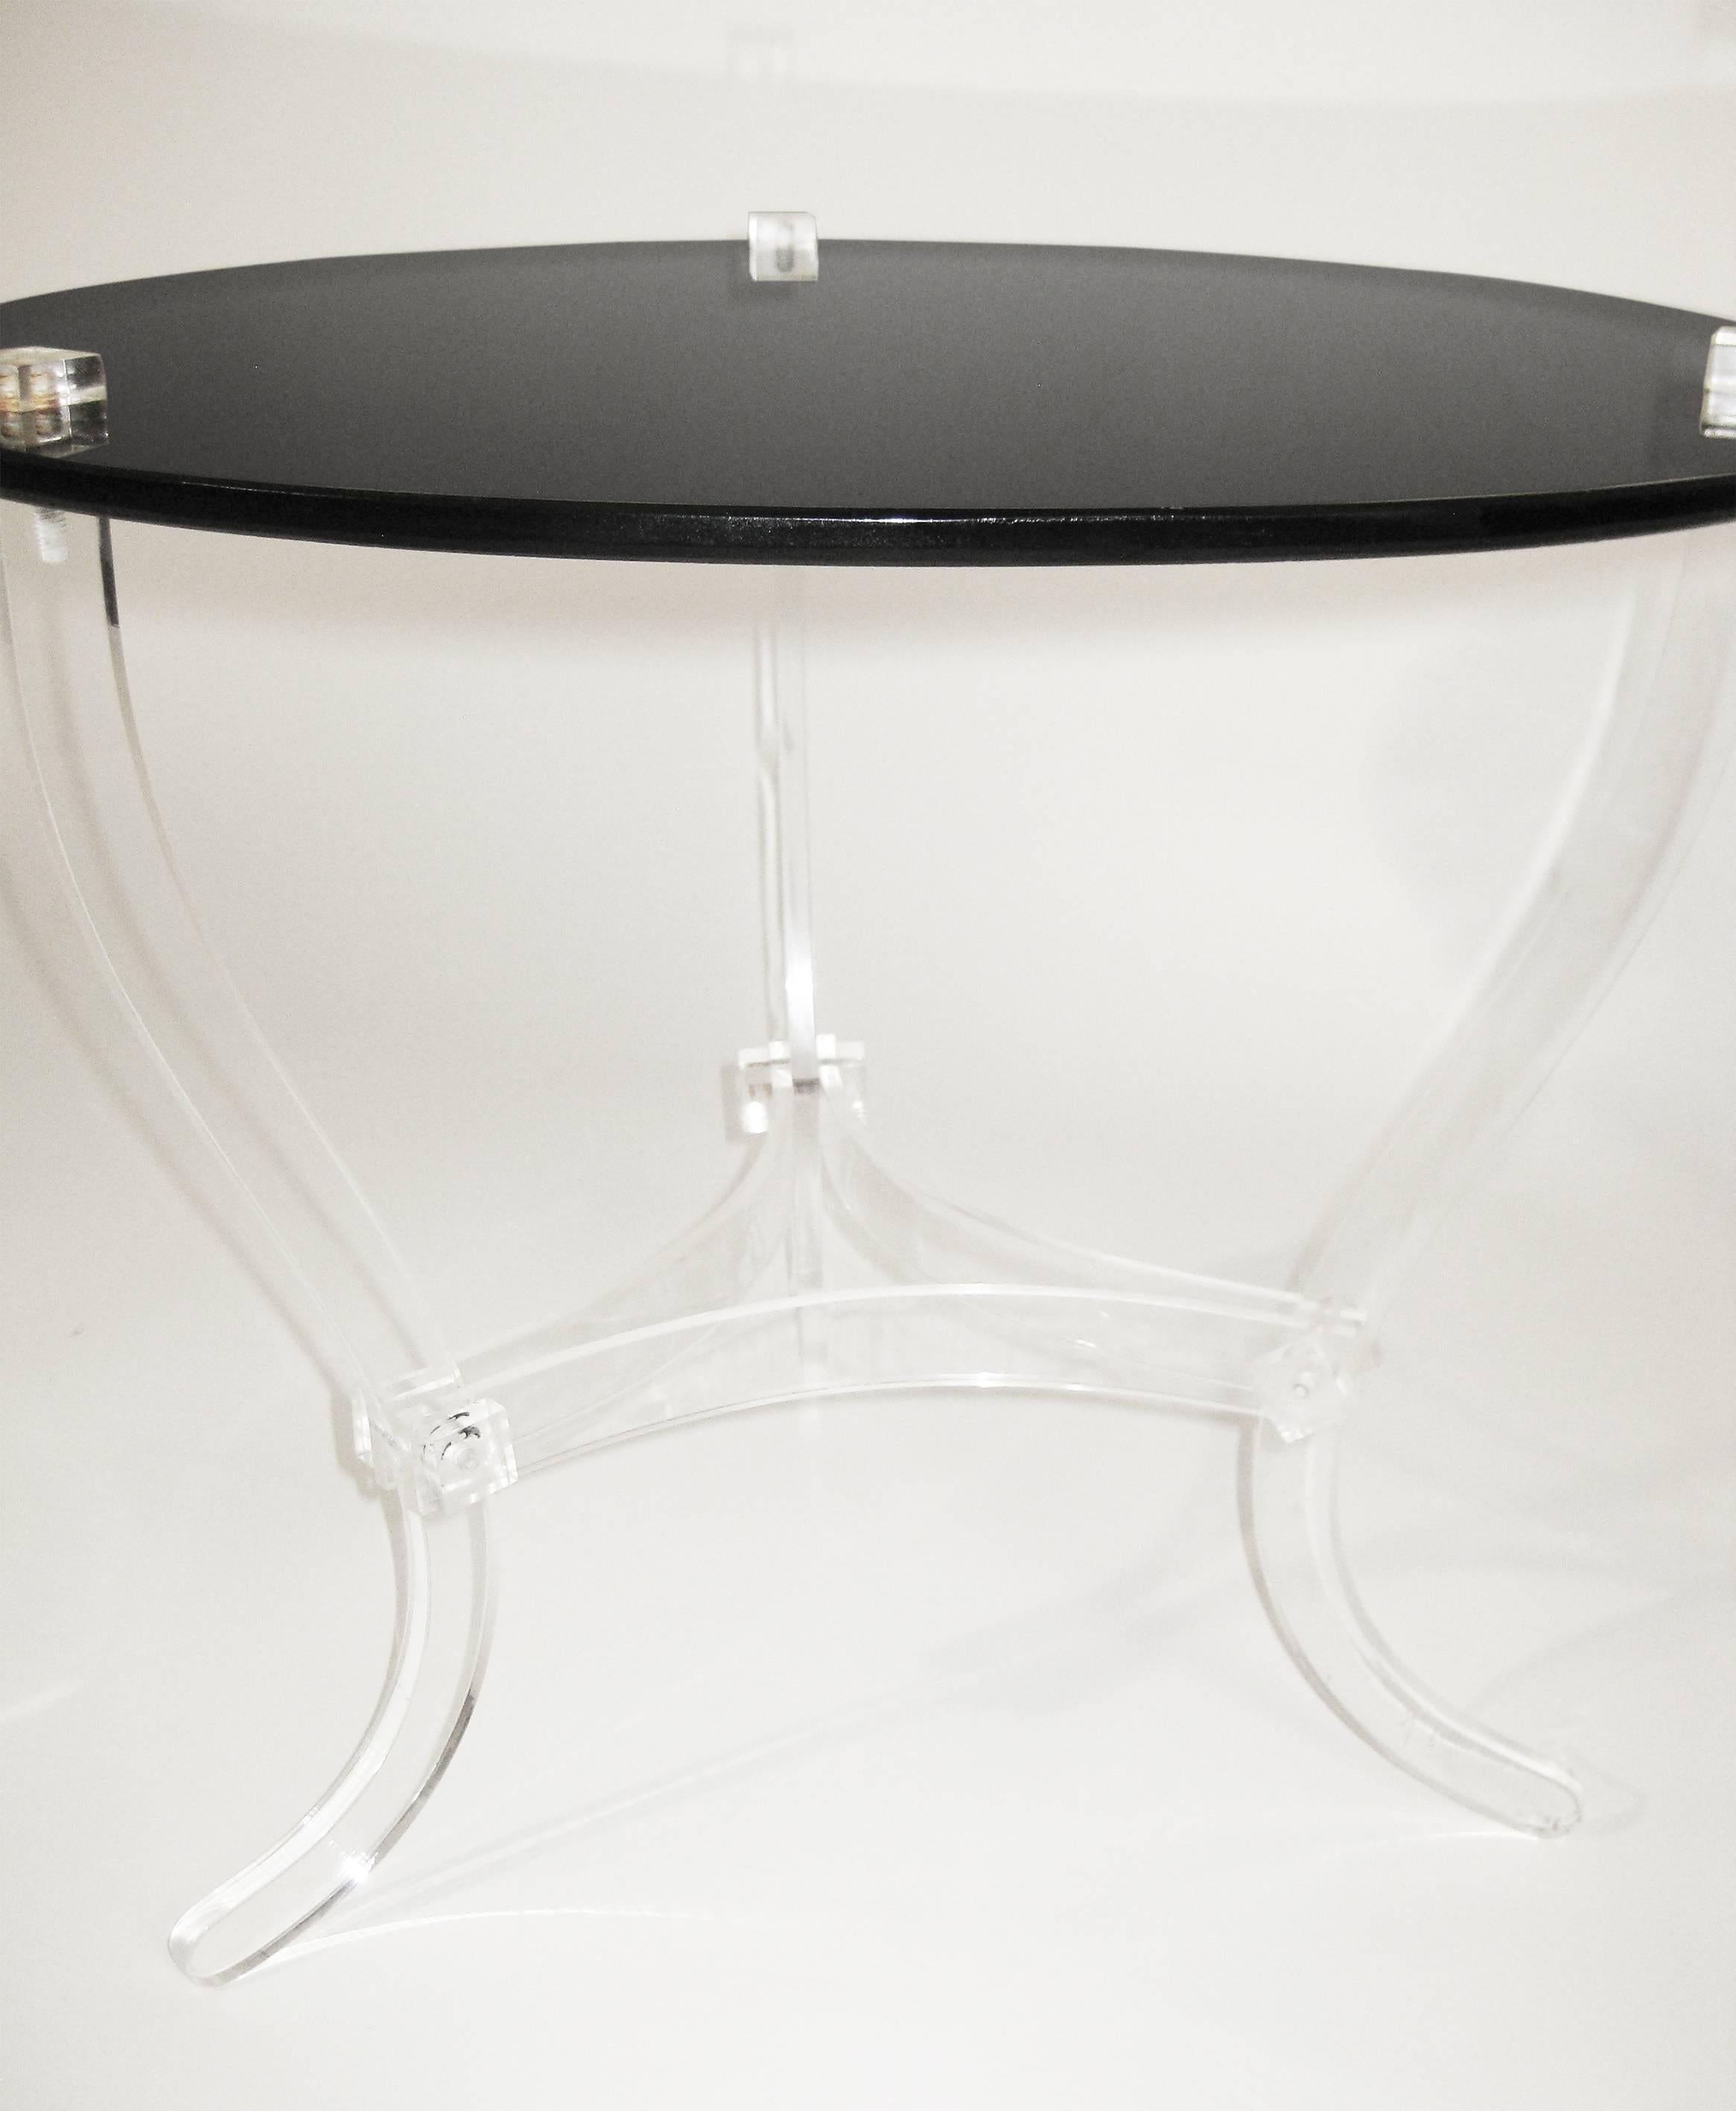 Midcentury Occasional Table, Lucite and Black Vitrolite, Mexico, circa 1965 In Excellent Condition For Sale In Mexico City, Cuauhtemoc